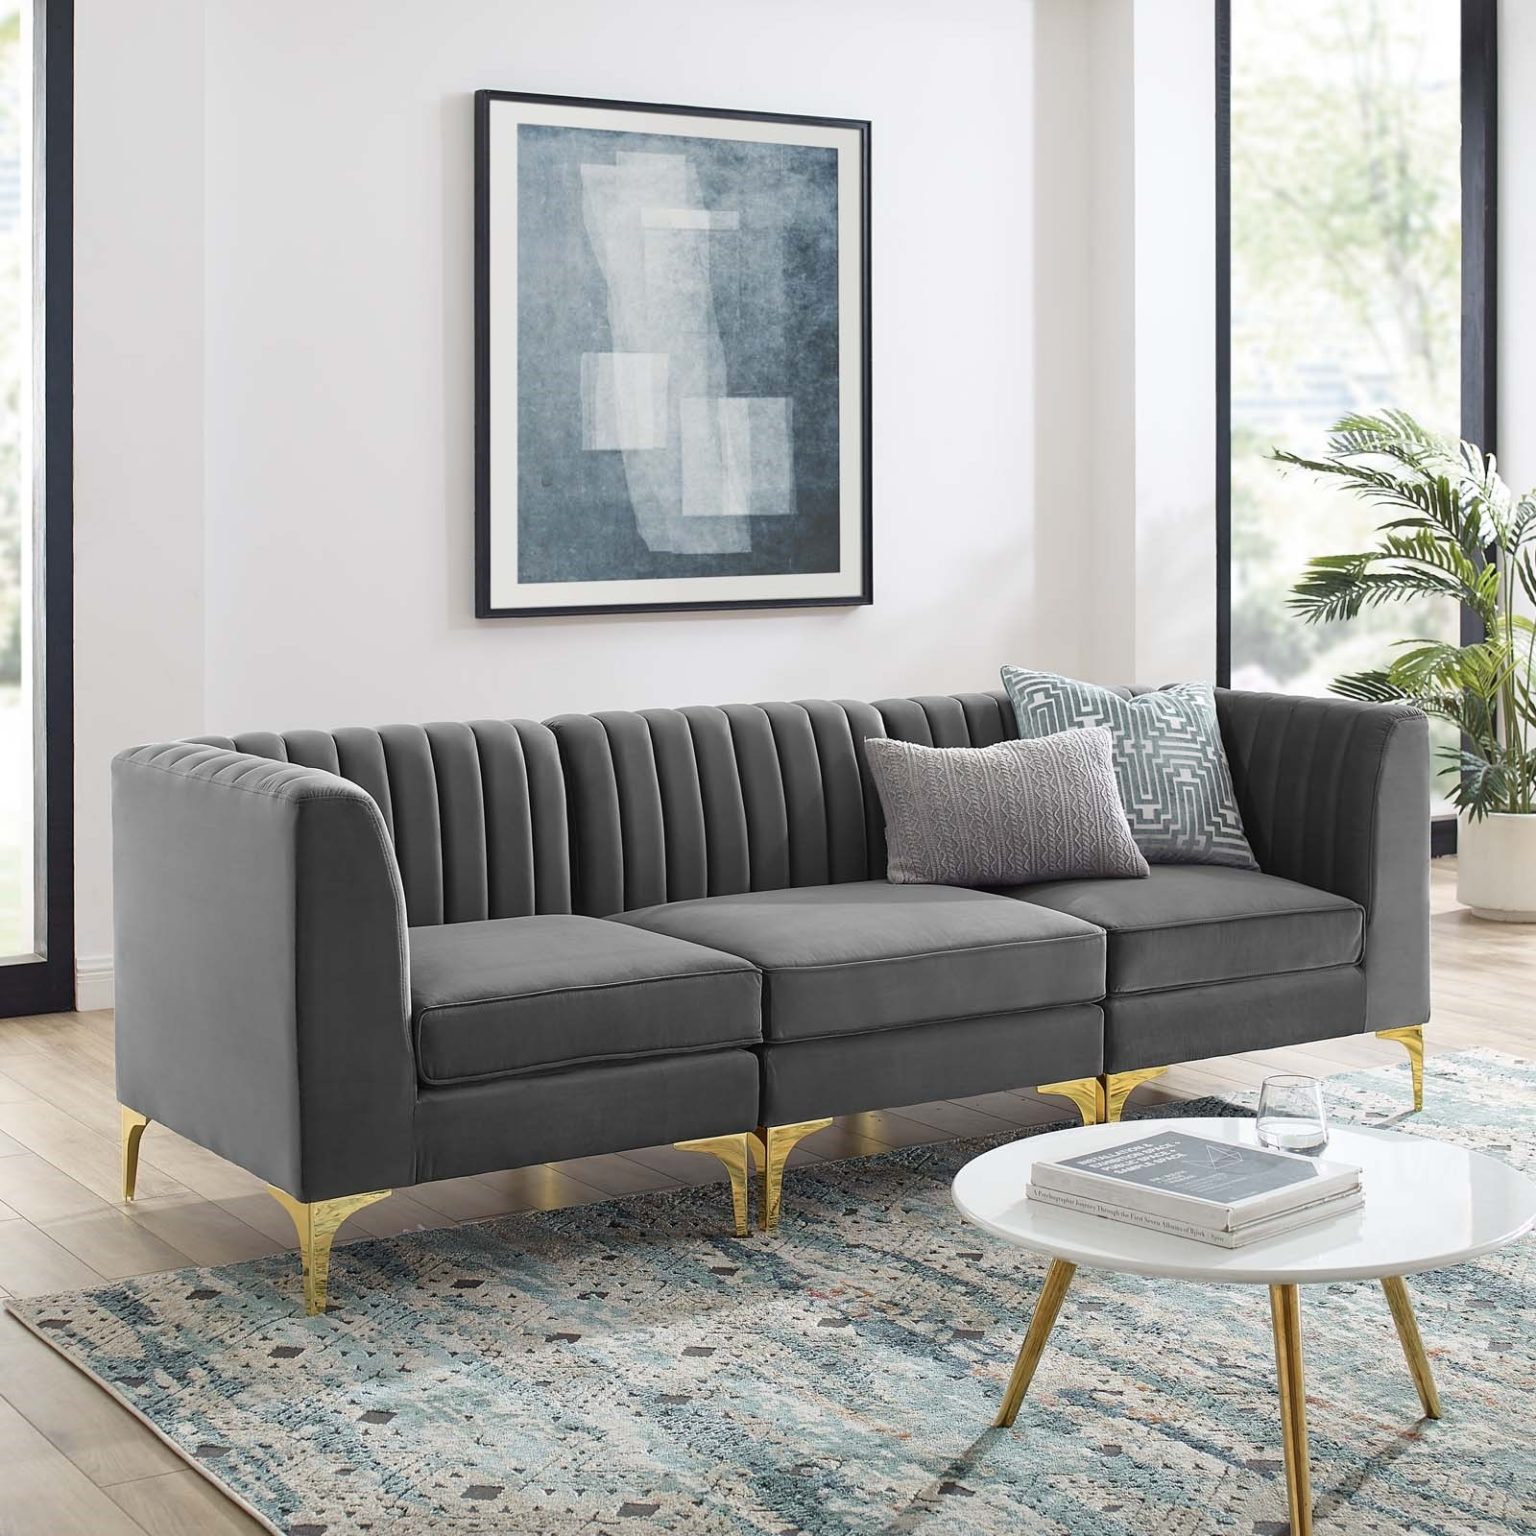 Triumph Channel Tufted Performance Velvet 3 Seater Sofa In Gray 5f08c12ed263f 1536x1536 